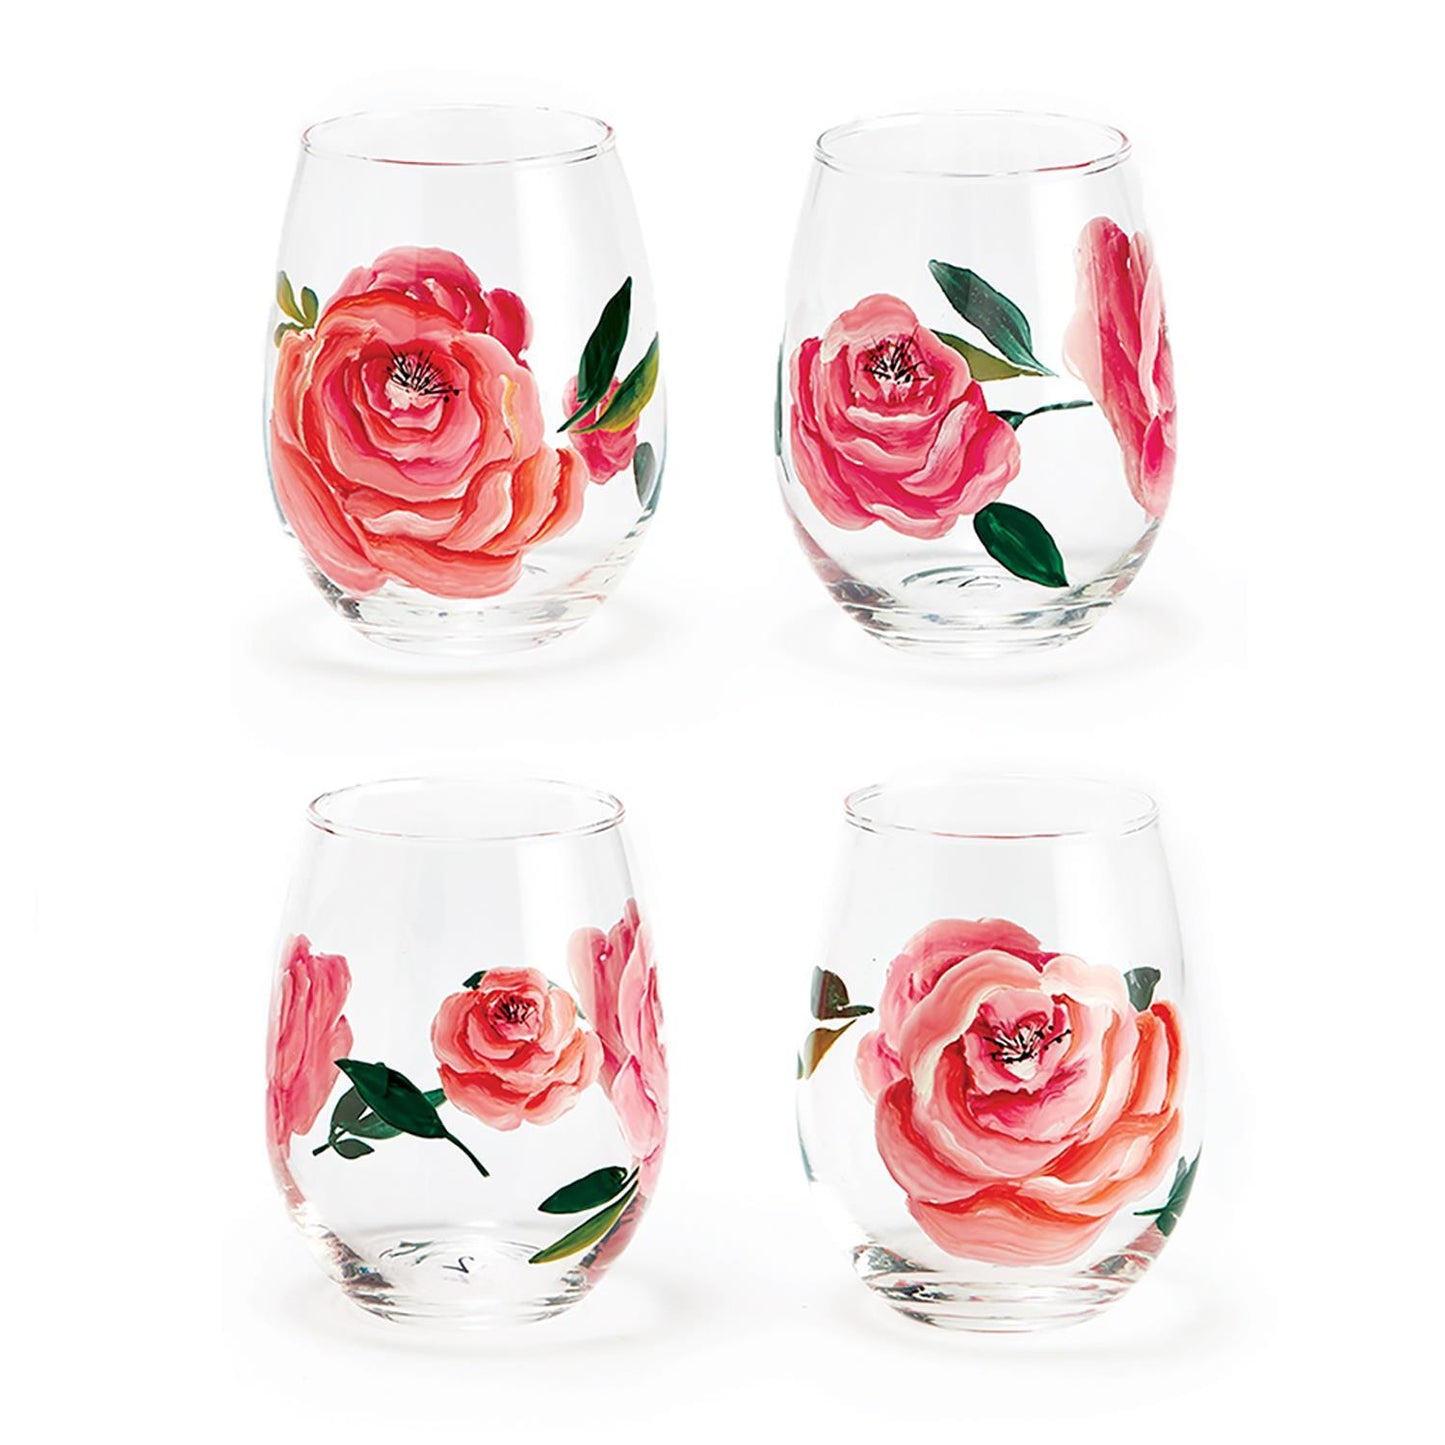 Two's Company In Full Bloom Roses Stemless Wine Glass, Set of 4, Hand-Painted